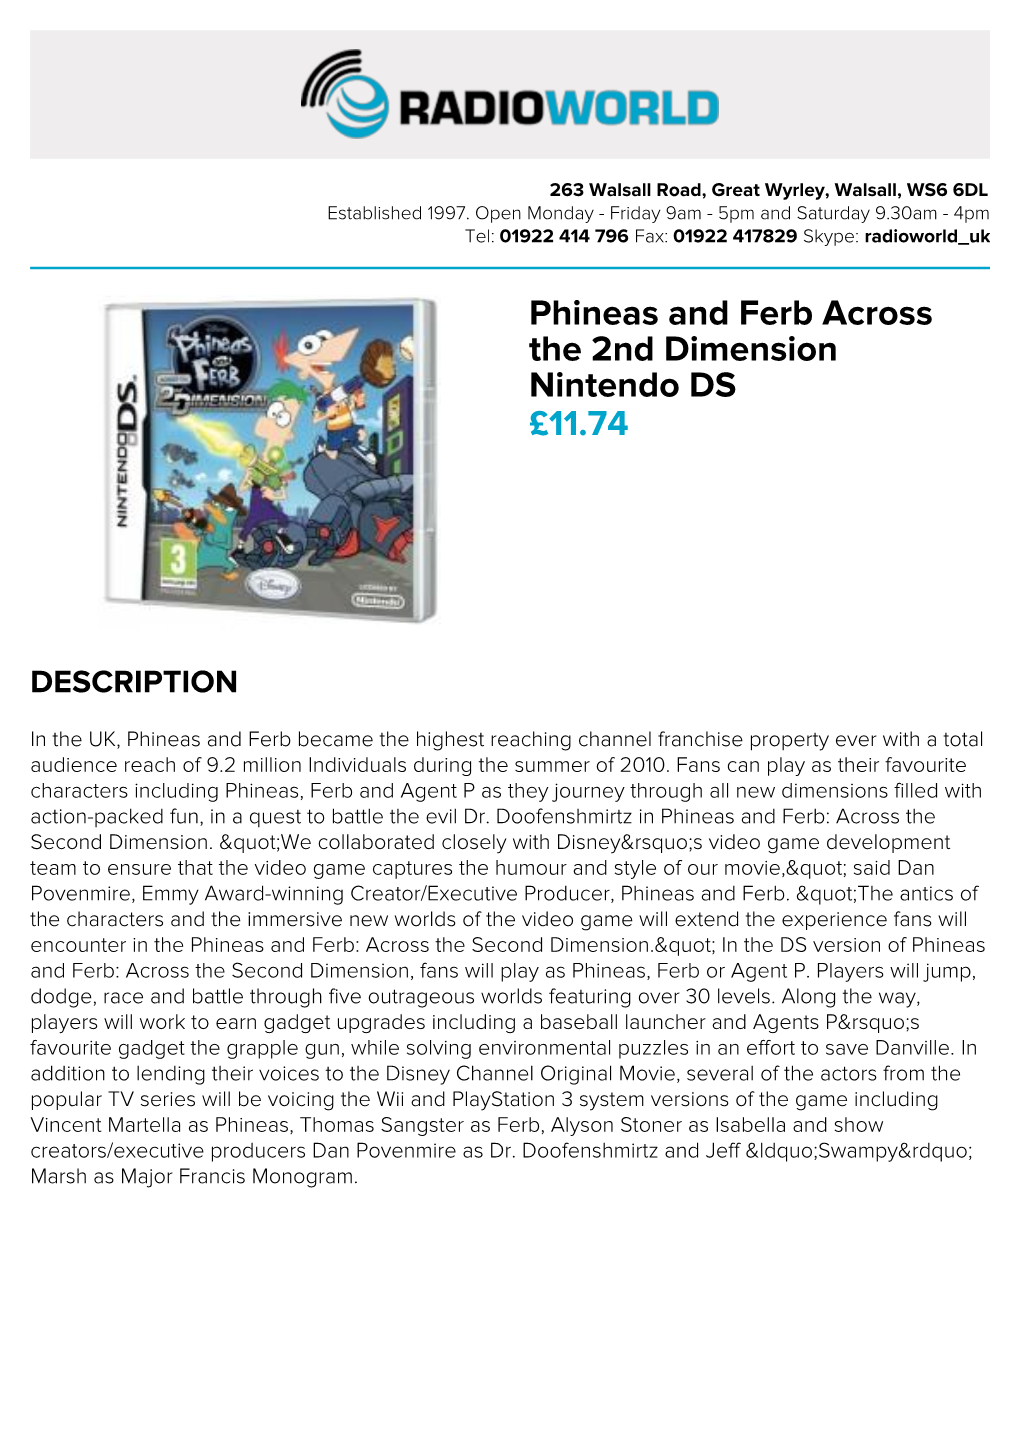 Phineas and Ferb Across the 2Nd Dimension Nintendo DS £11.74